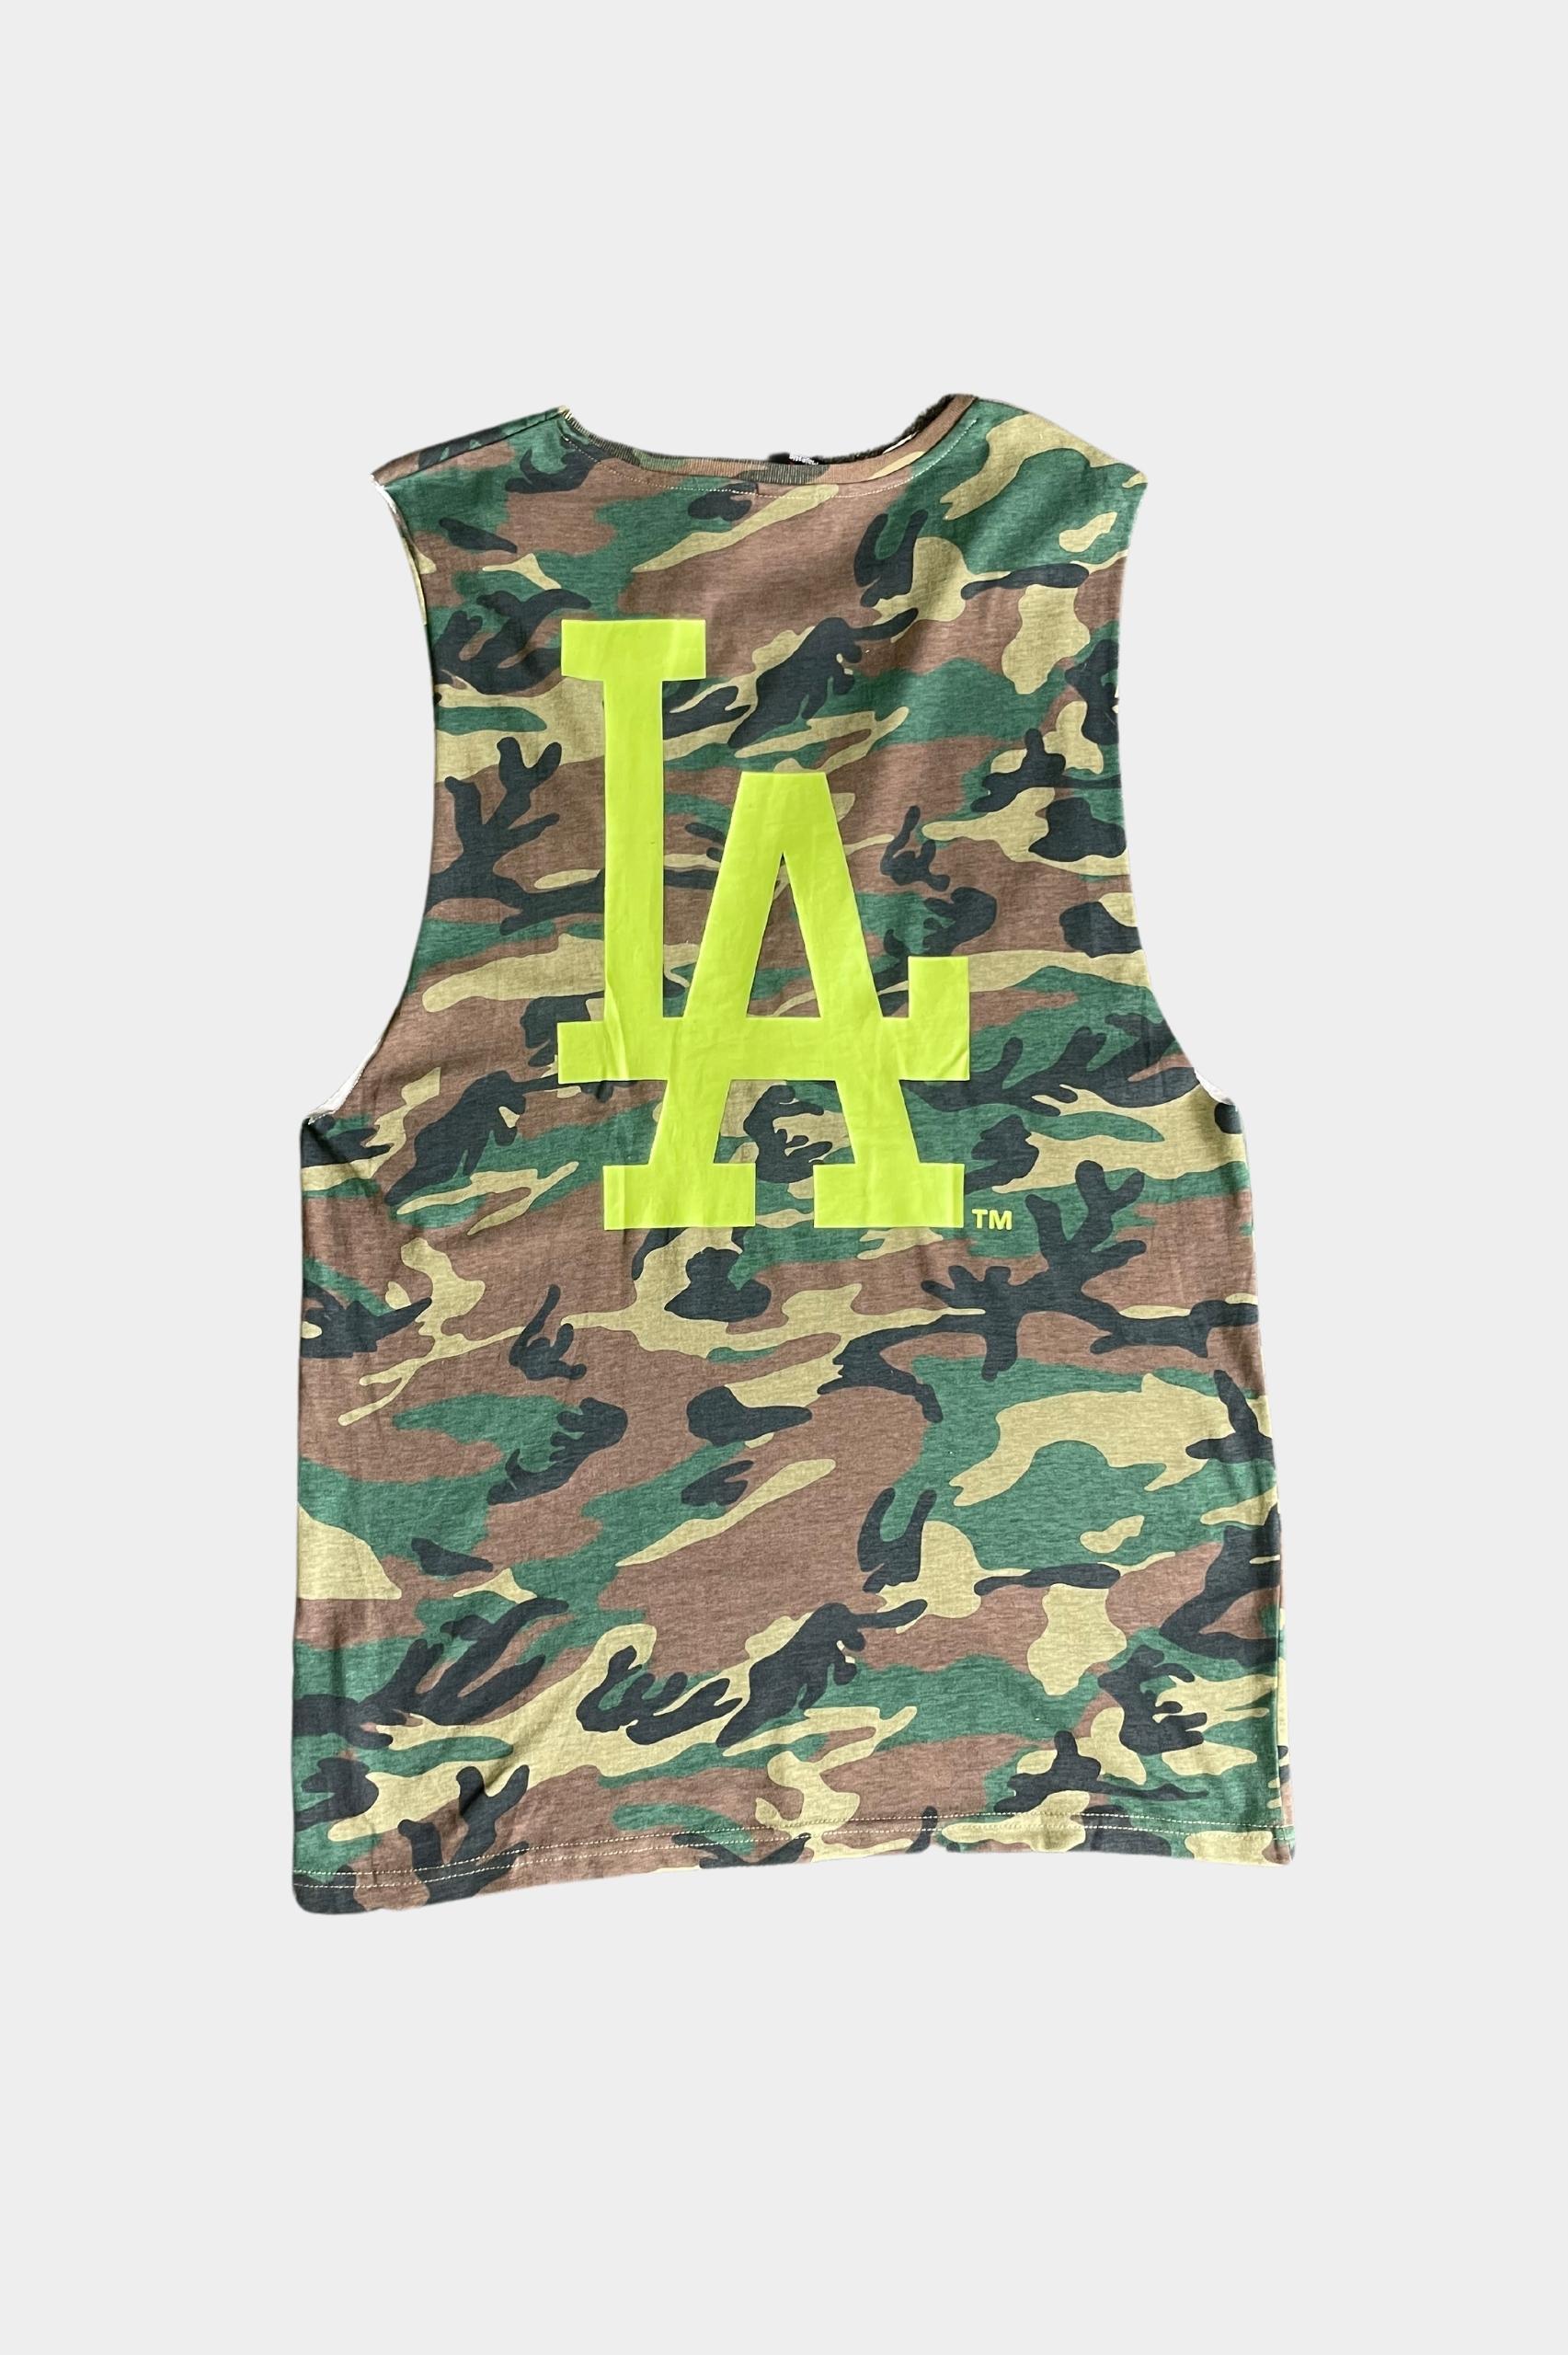 Majestic L.A Dodgers Muscle Tee in Camo/Green - SAMPLE